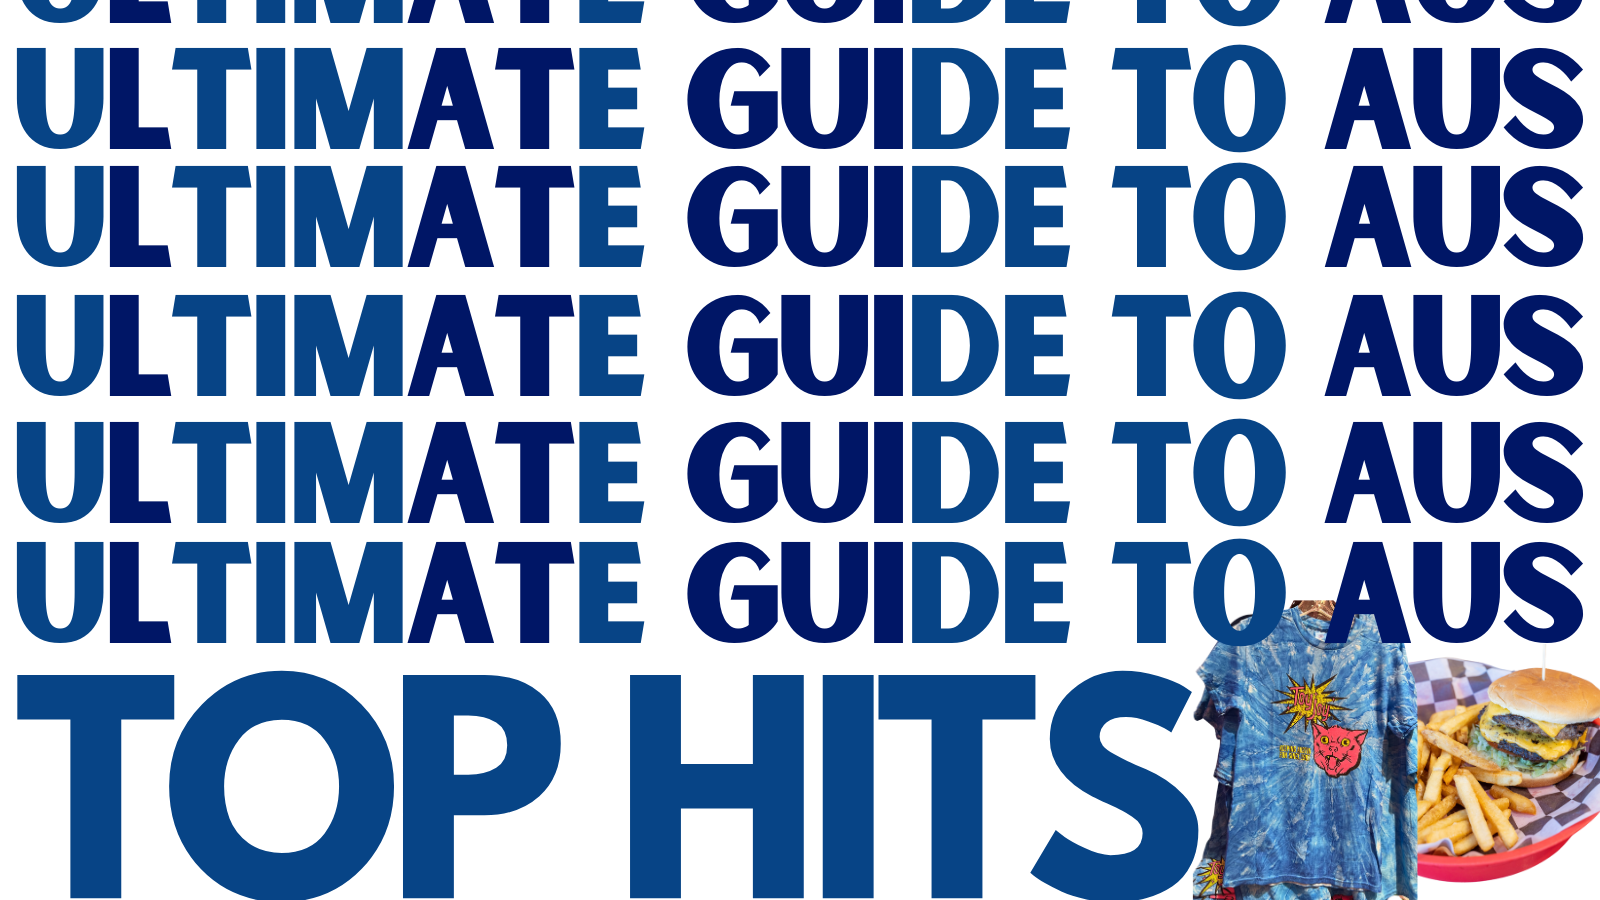 Text reads: Ultimate guide to AUS - Top HIts